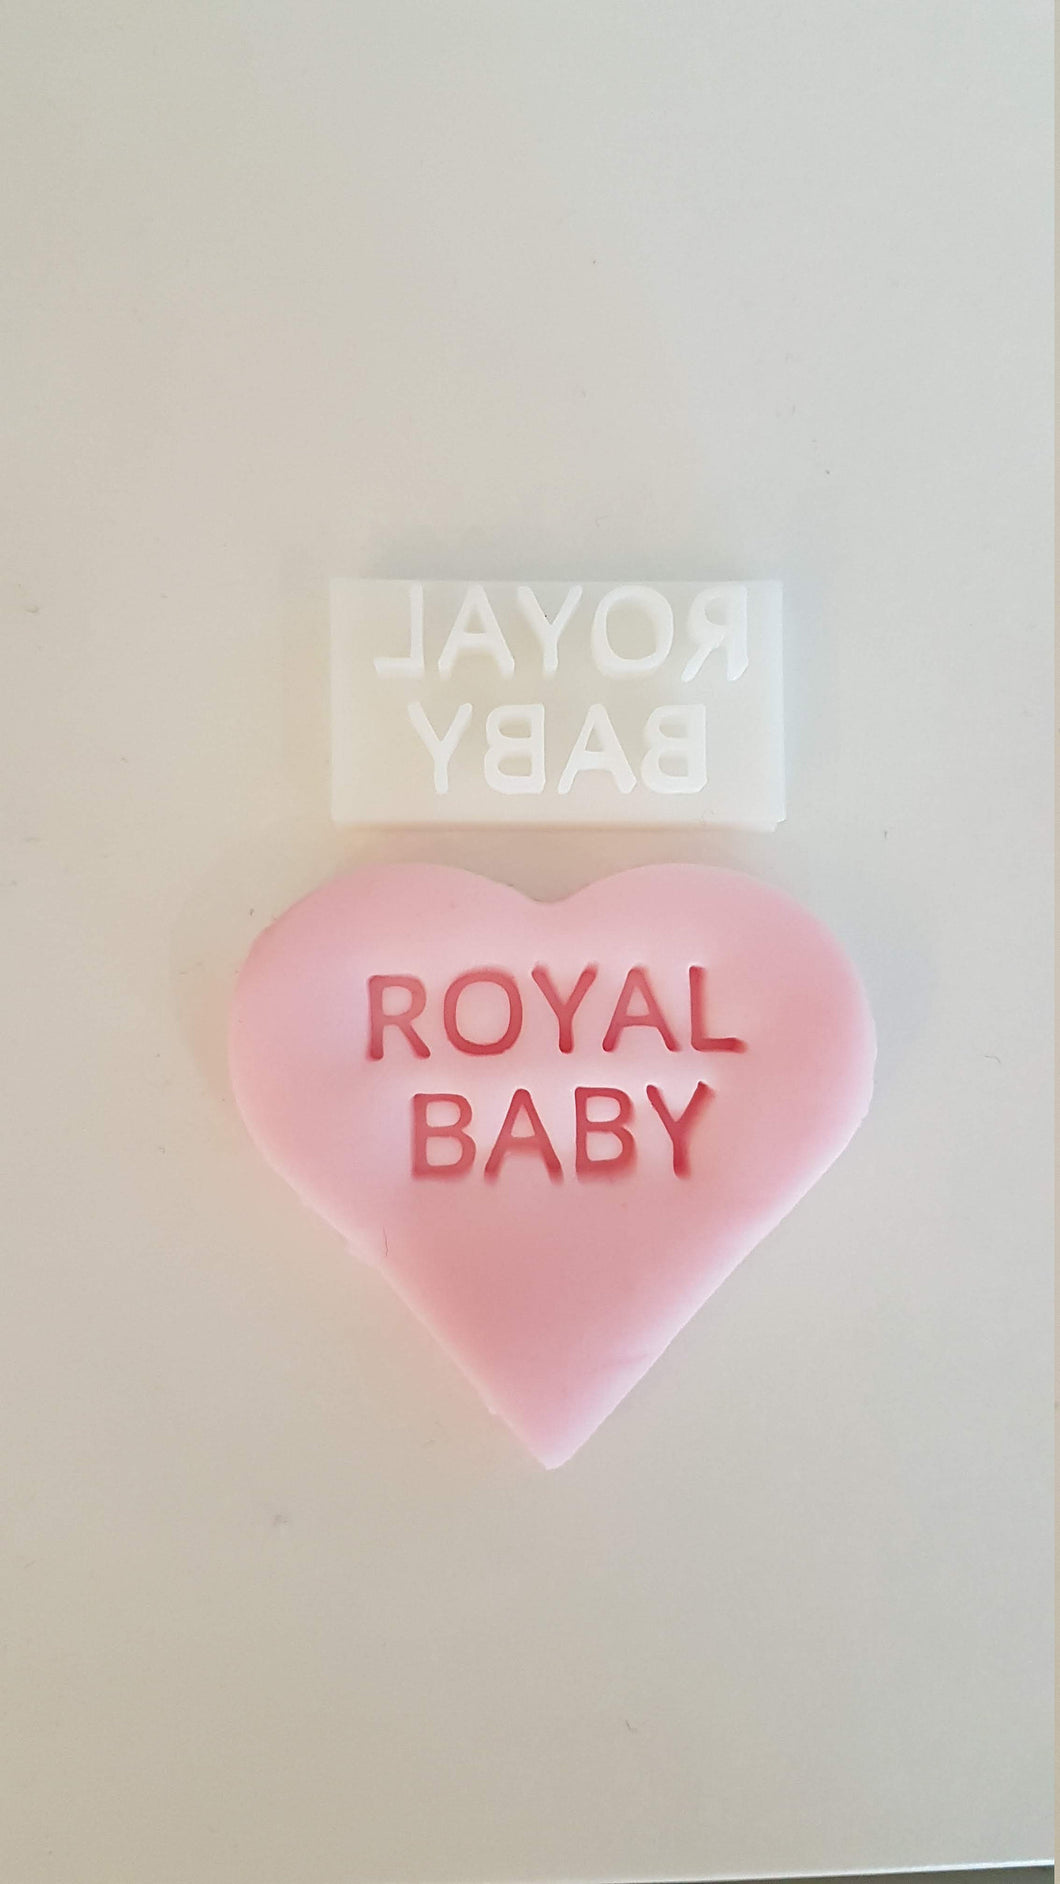 Royal Baby Stamp|Icing|Baking|Cookie Stamp|Baby Shower|Birth Harry & Meghan